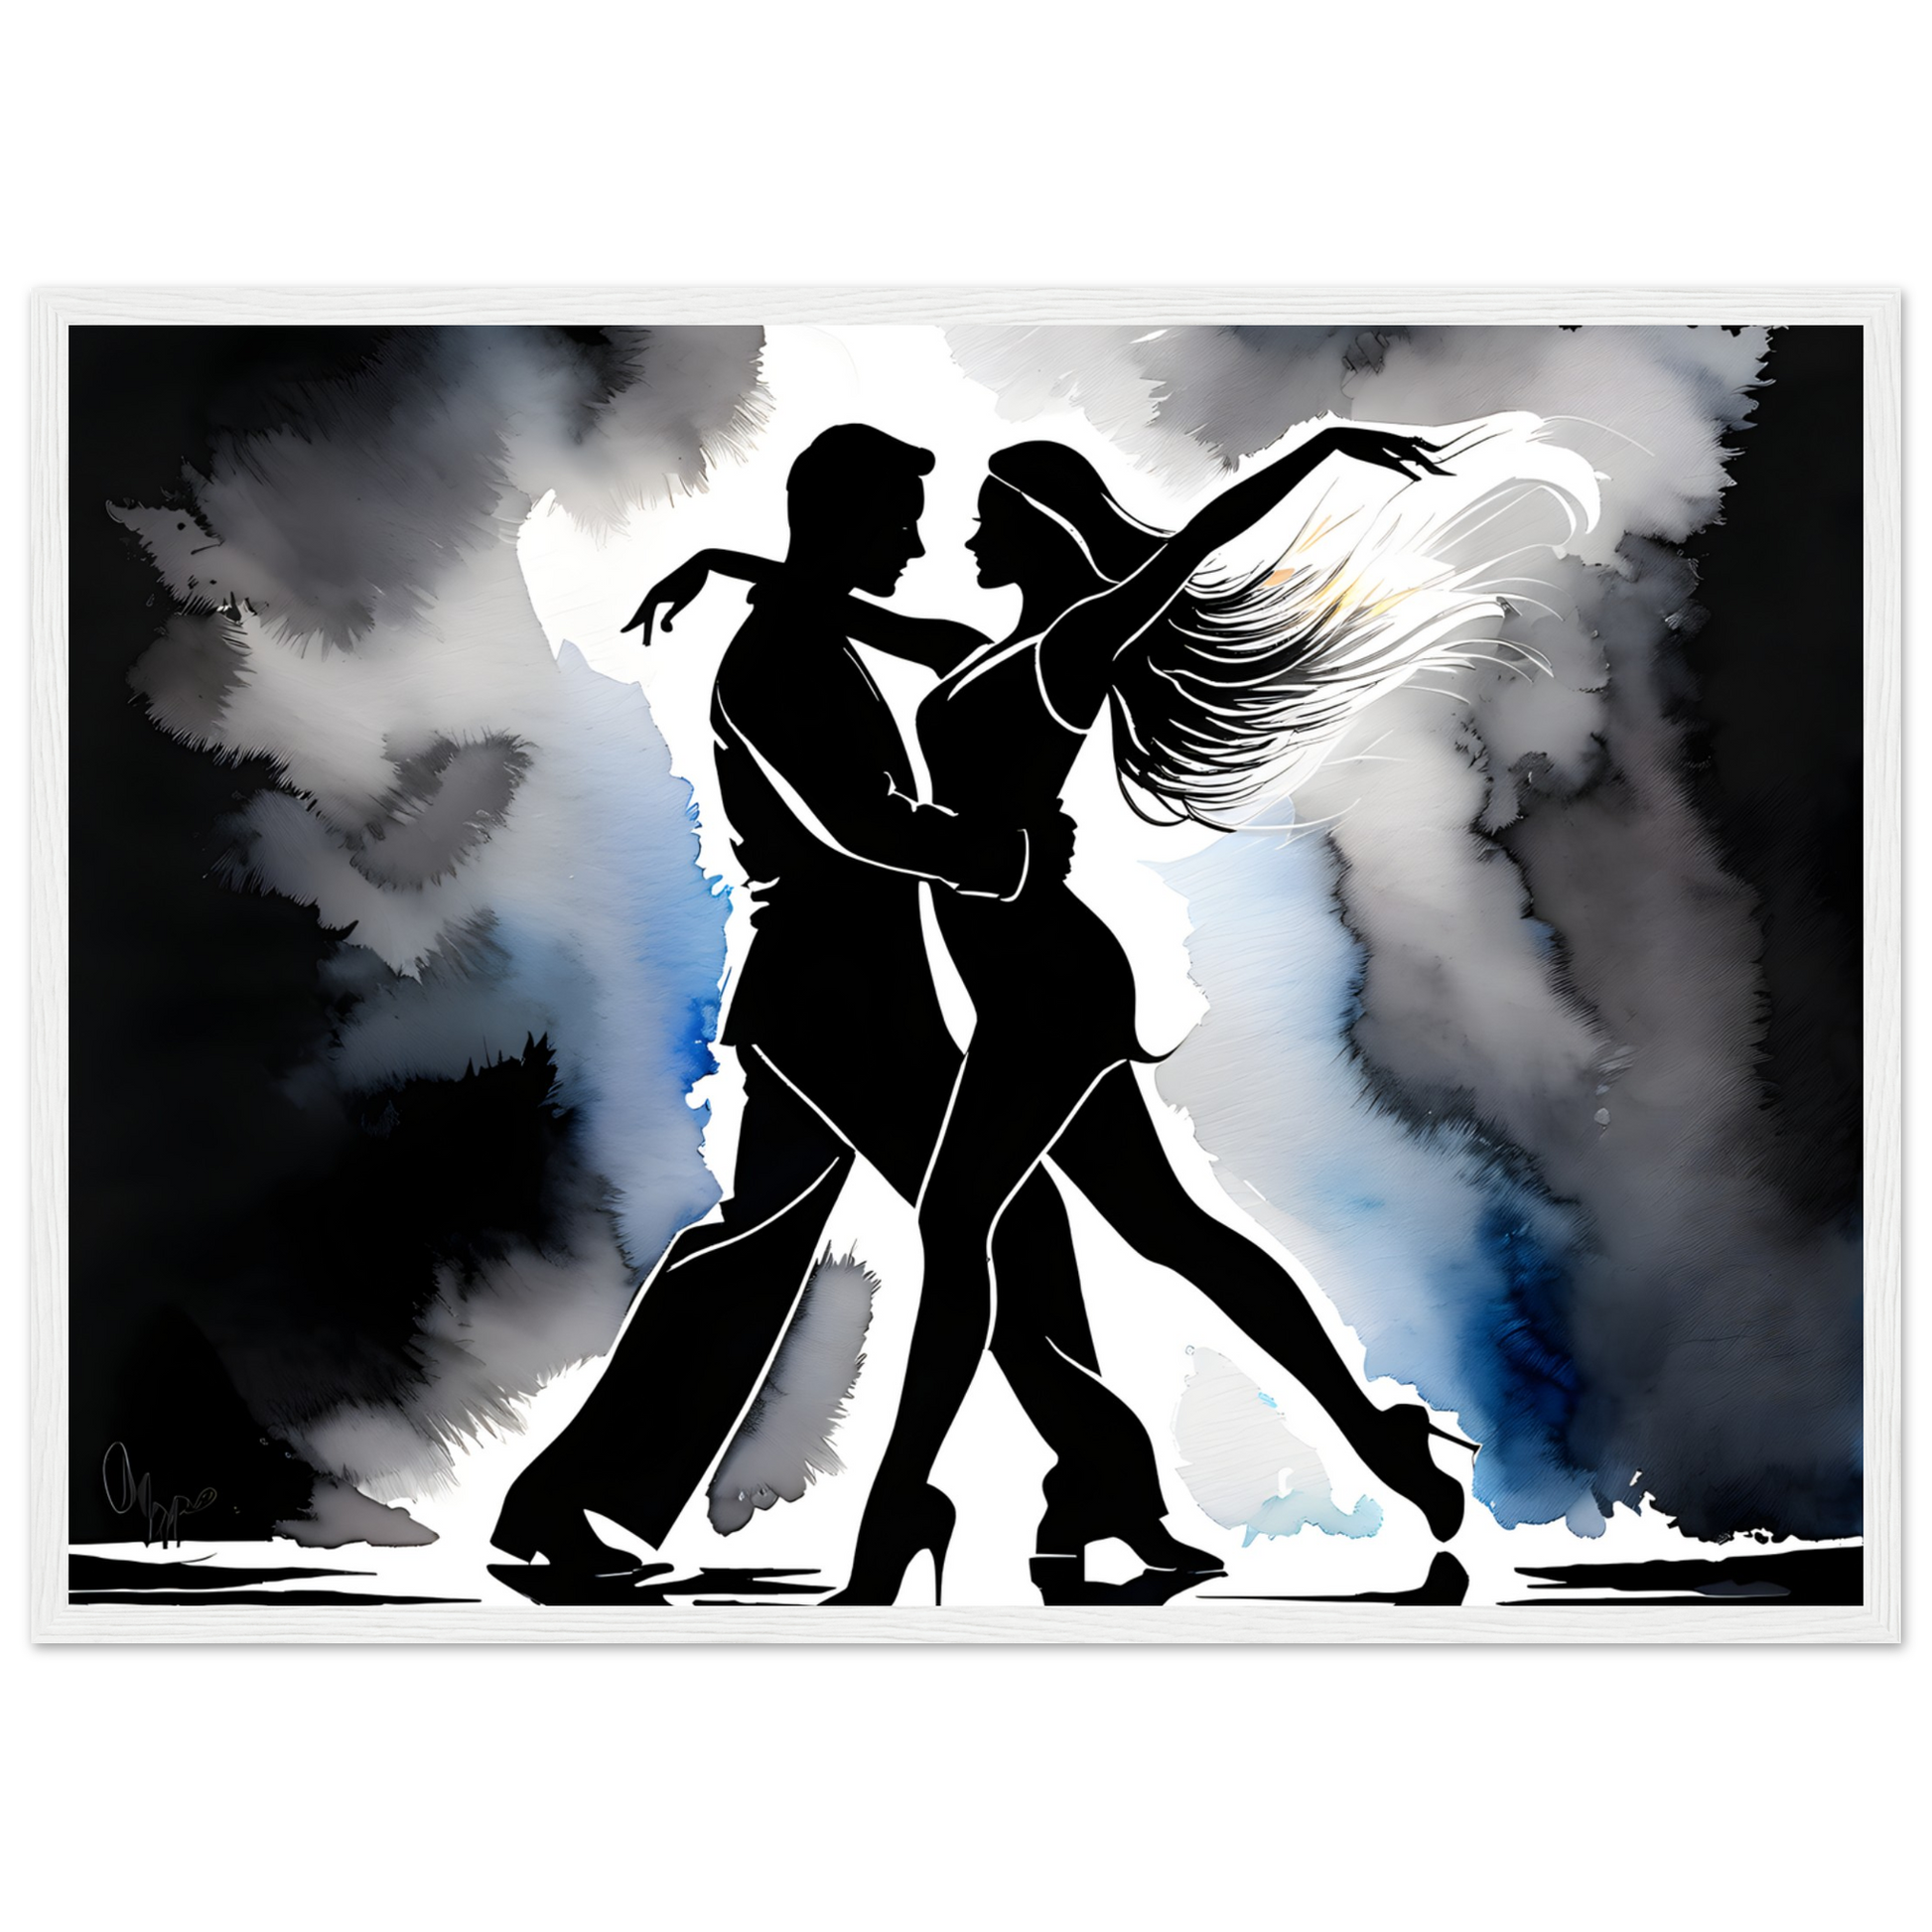 Silhouette of  a Dancing Couple